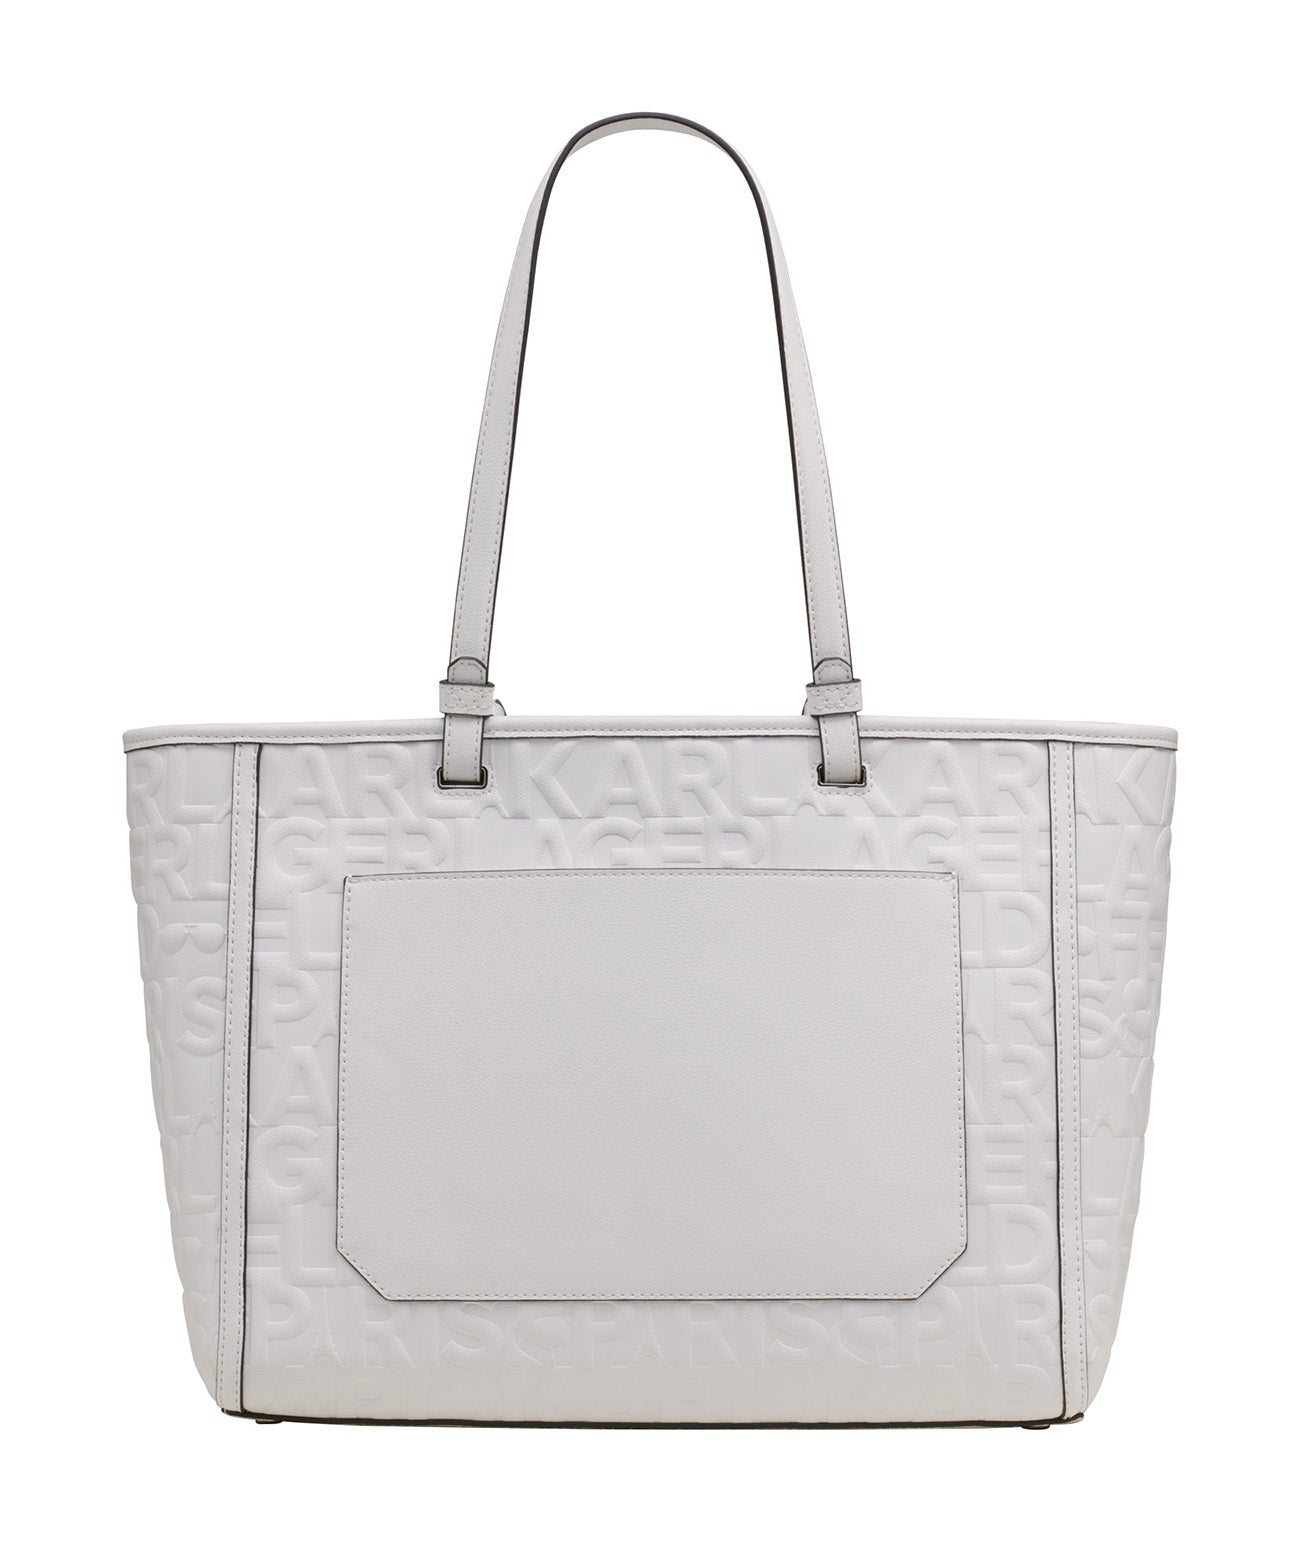 MAYBELLE TOTE